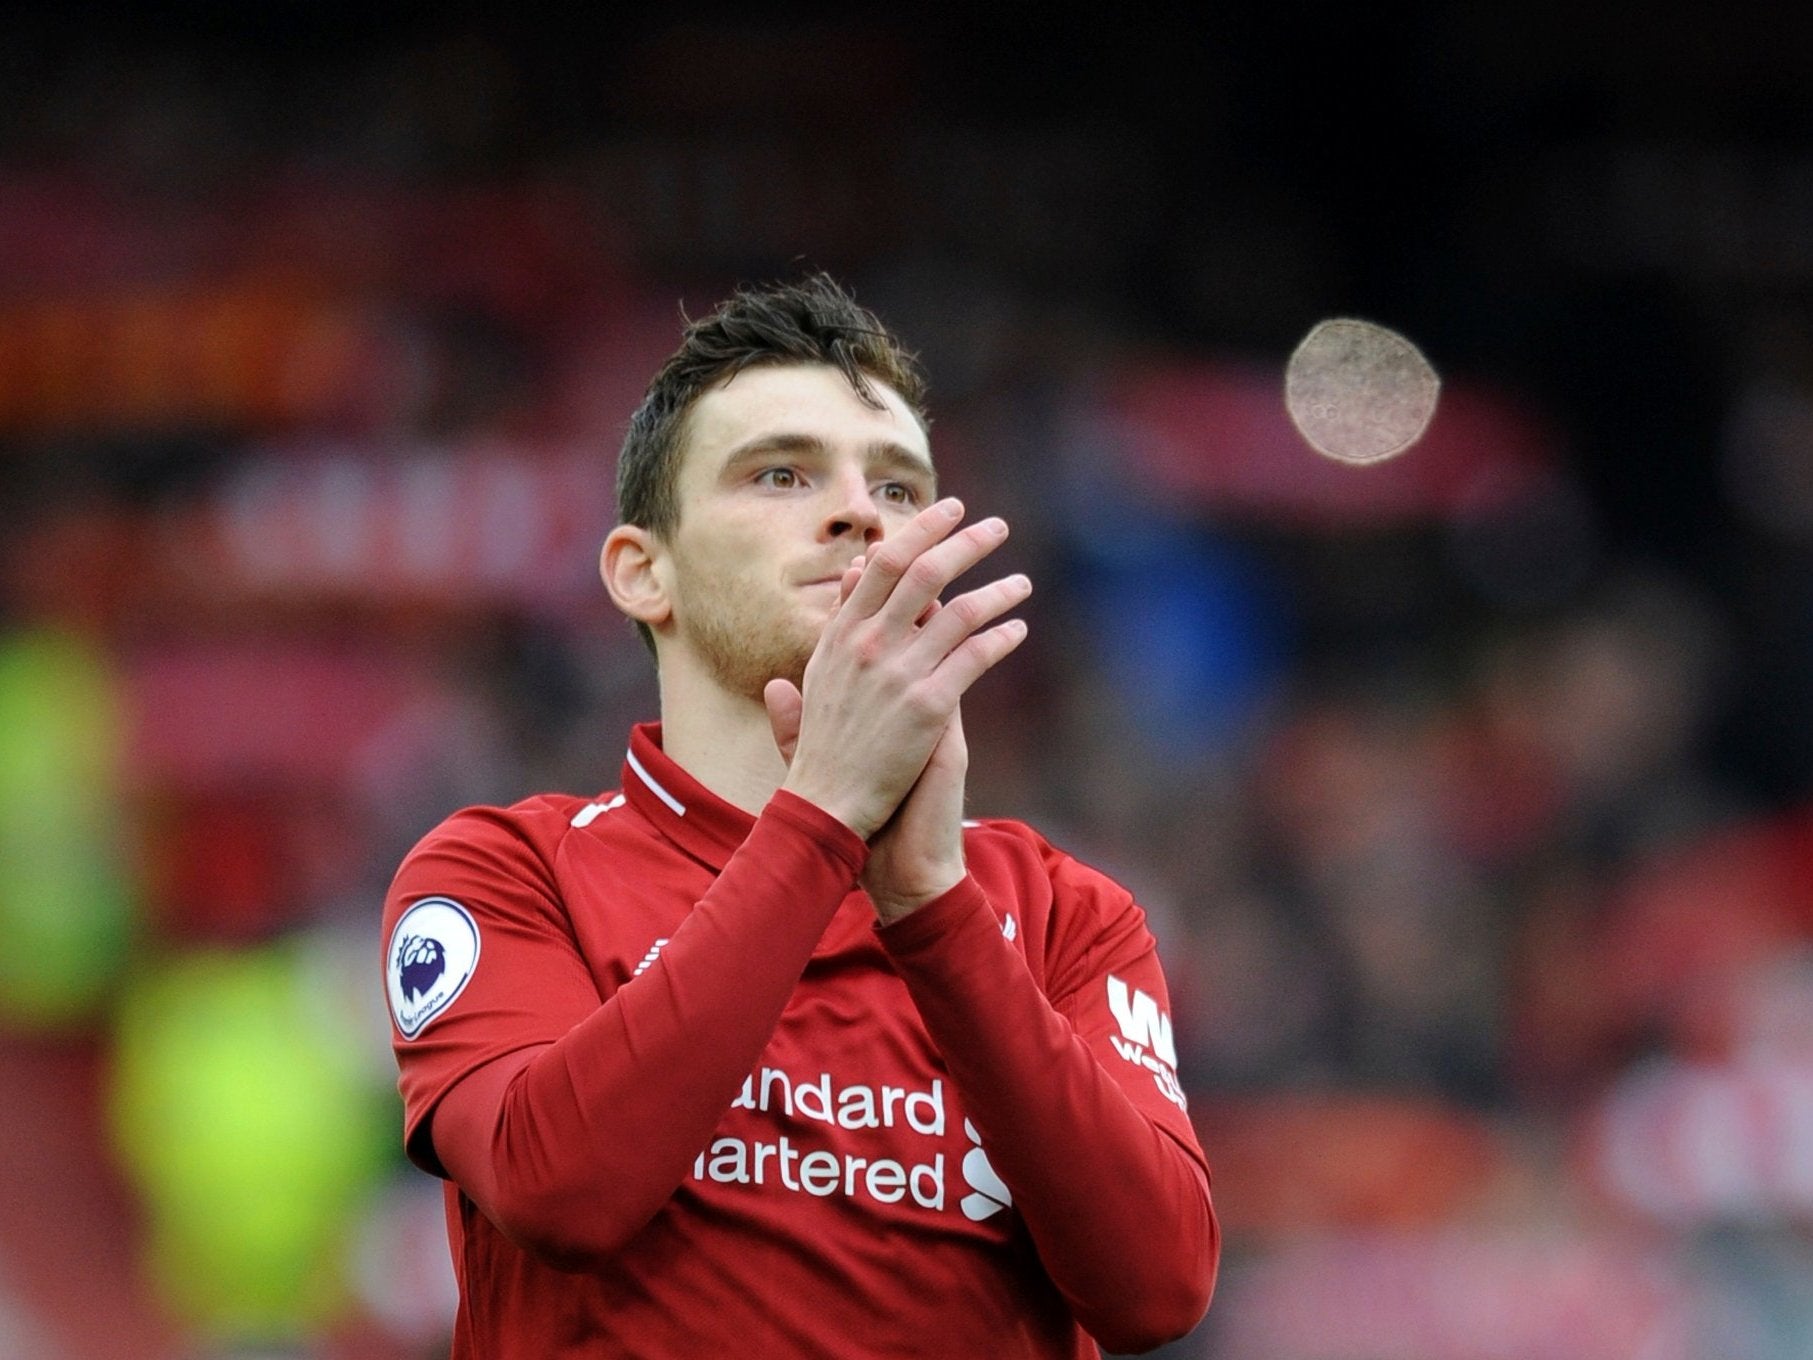 Robertson was excellent again for Liverpool